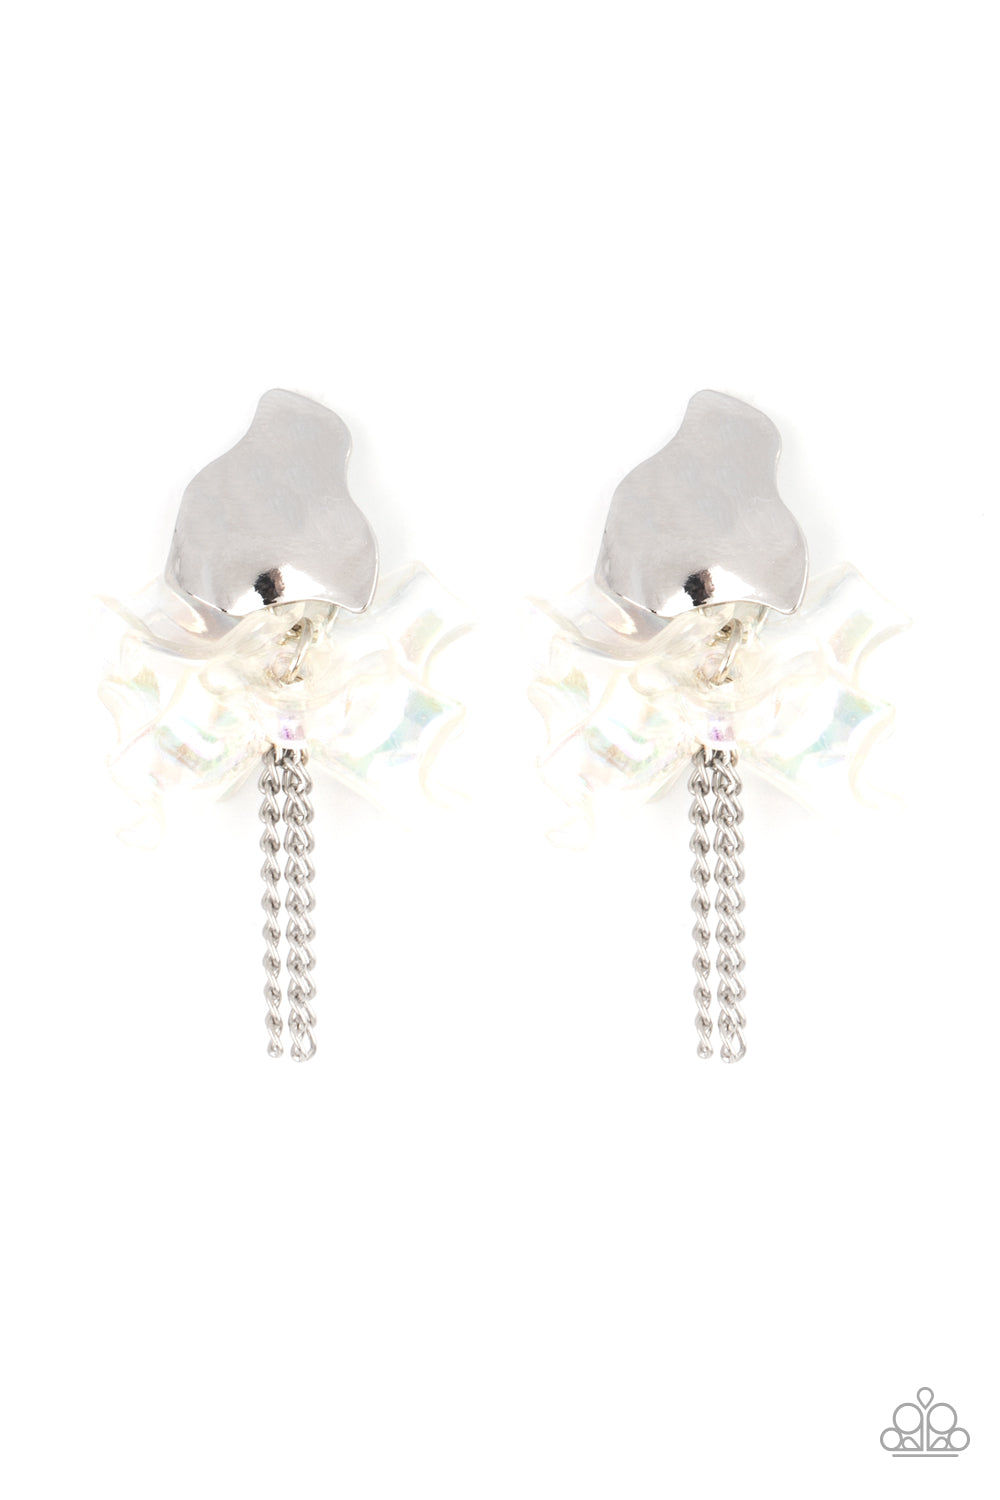 Paparazzi Accessories Harmonically Holographic - White Earrings dainty silver chains stream out from the bottom of iridescent acrylic petal-like frames that attach to an asymmetrical silver frame, creating an enchanting cluster. Earring attaches to a standard post fitting.